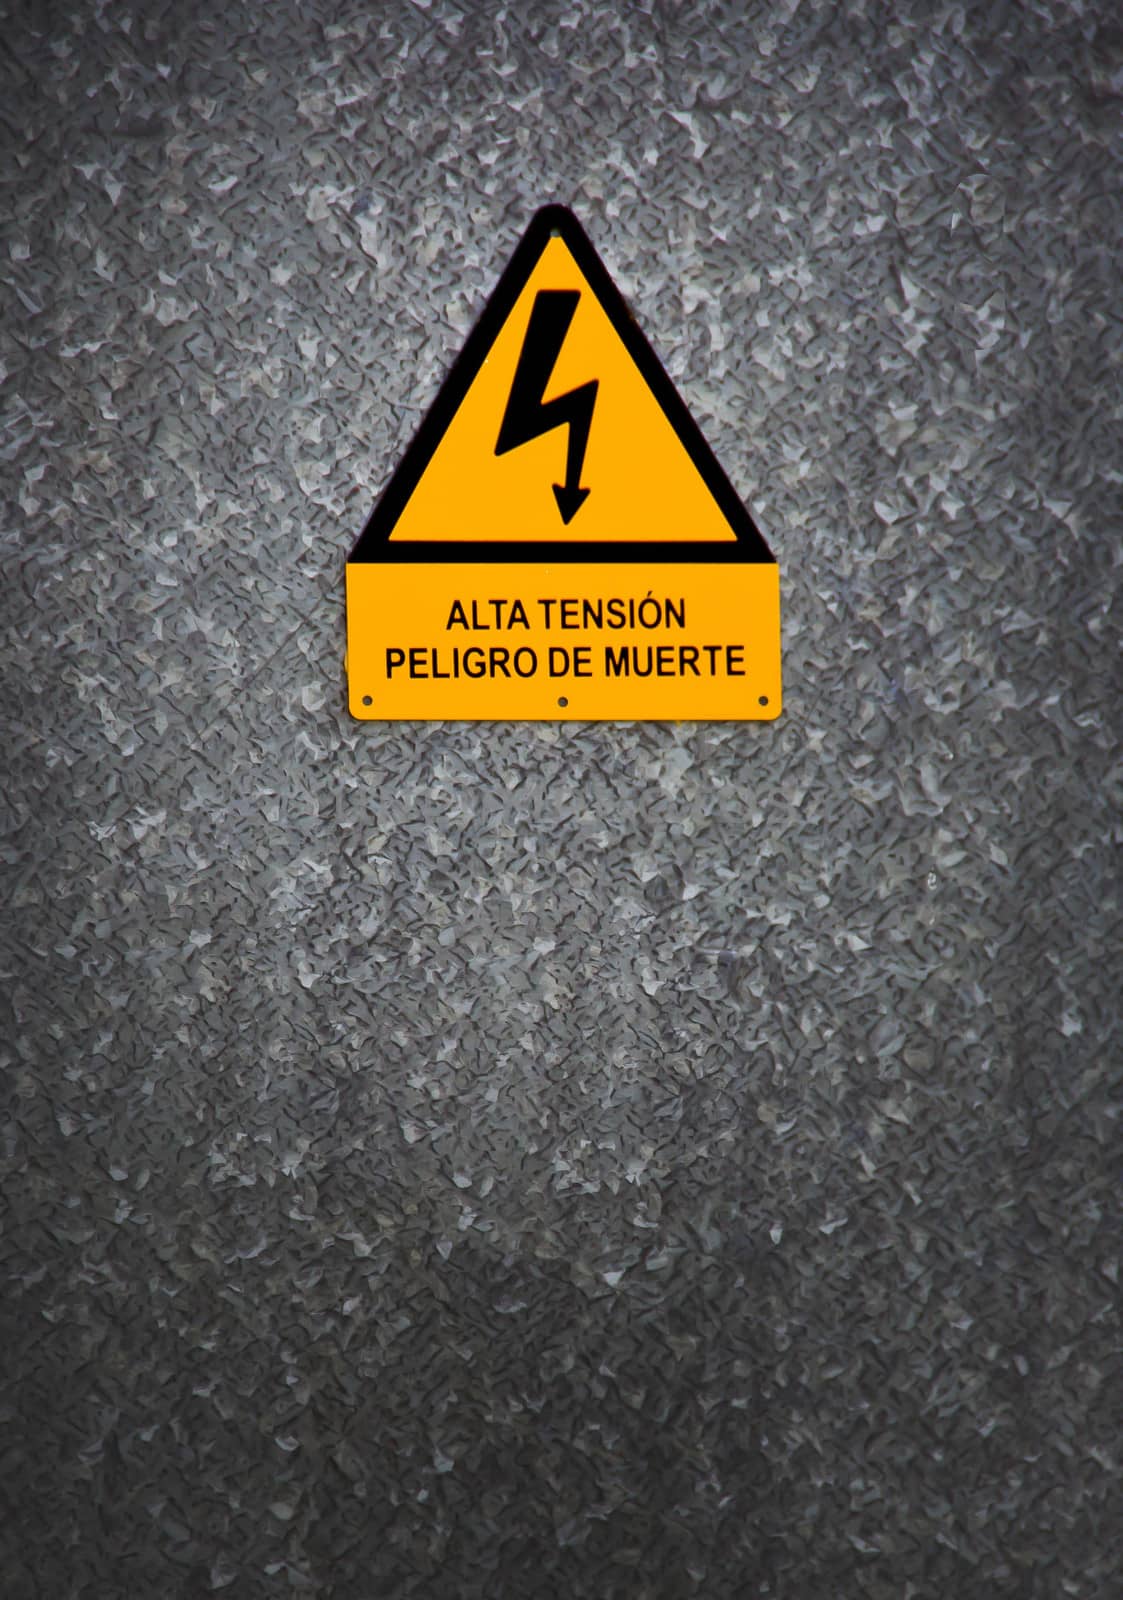 warning sign on gray background in Asturias, Spain